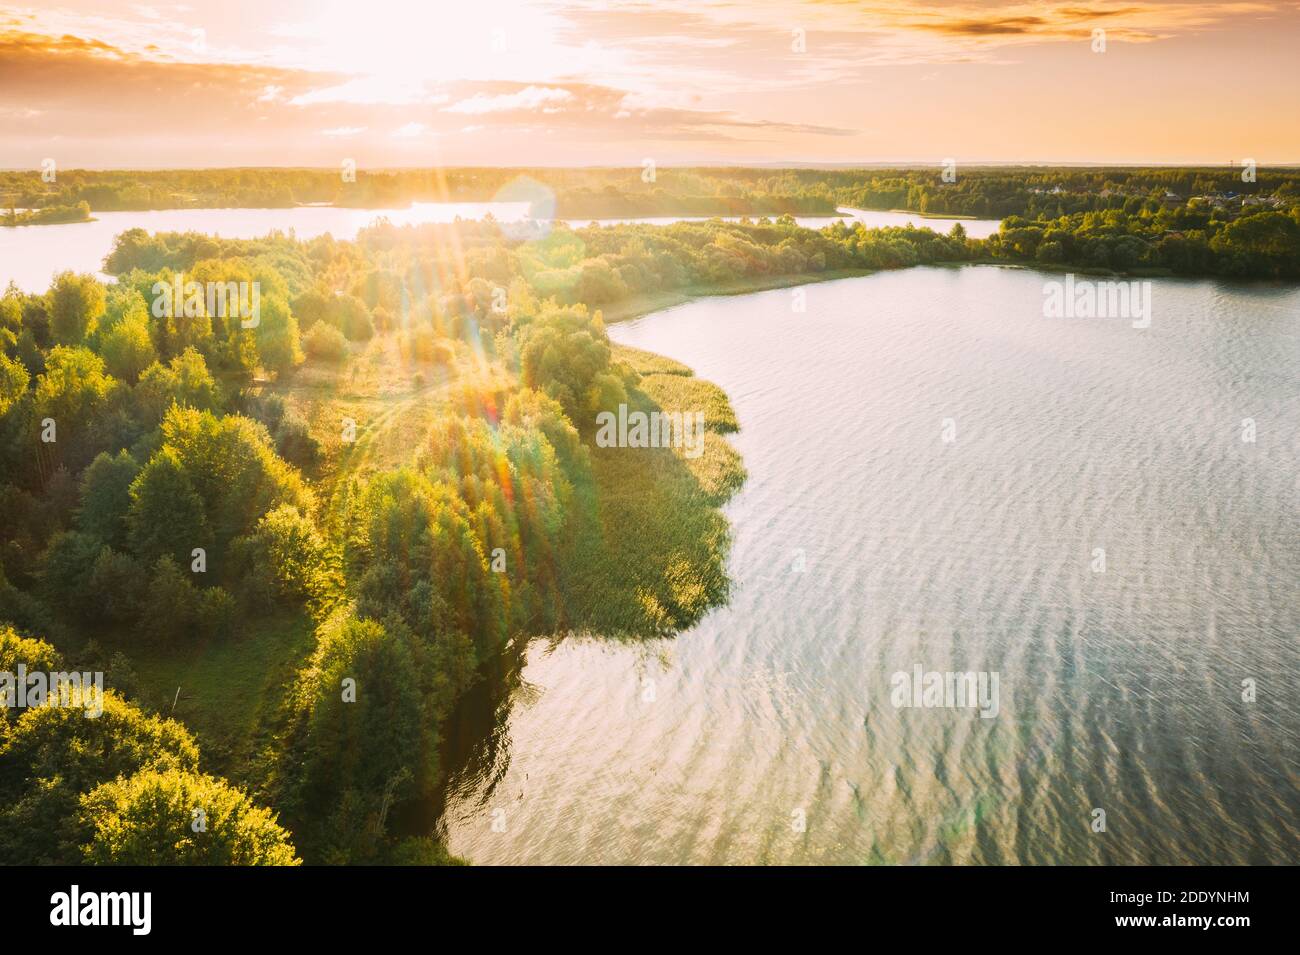 Belarus. Elevated View Of Green Forest Growth On River Coast Landscape In Sunny Summer Morning. Stock Photo